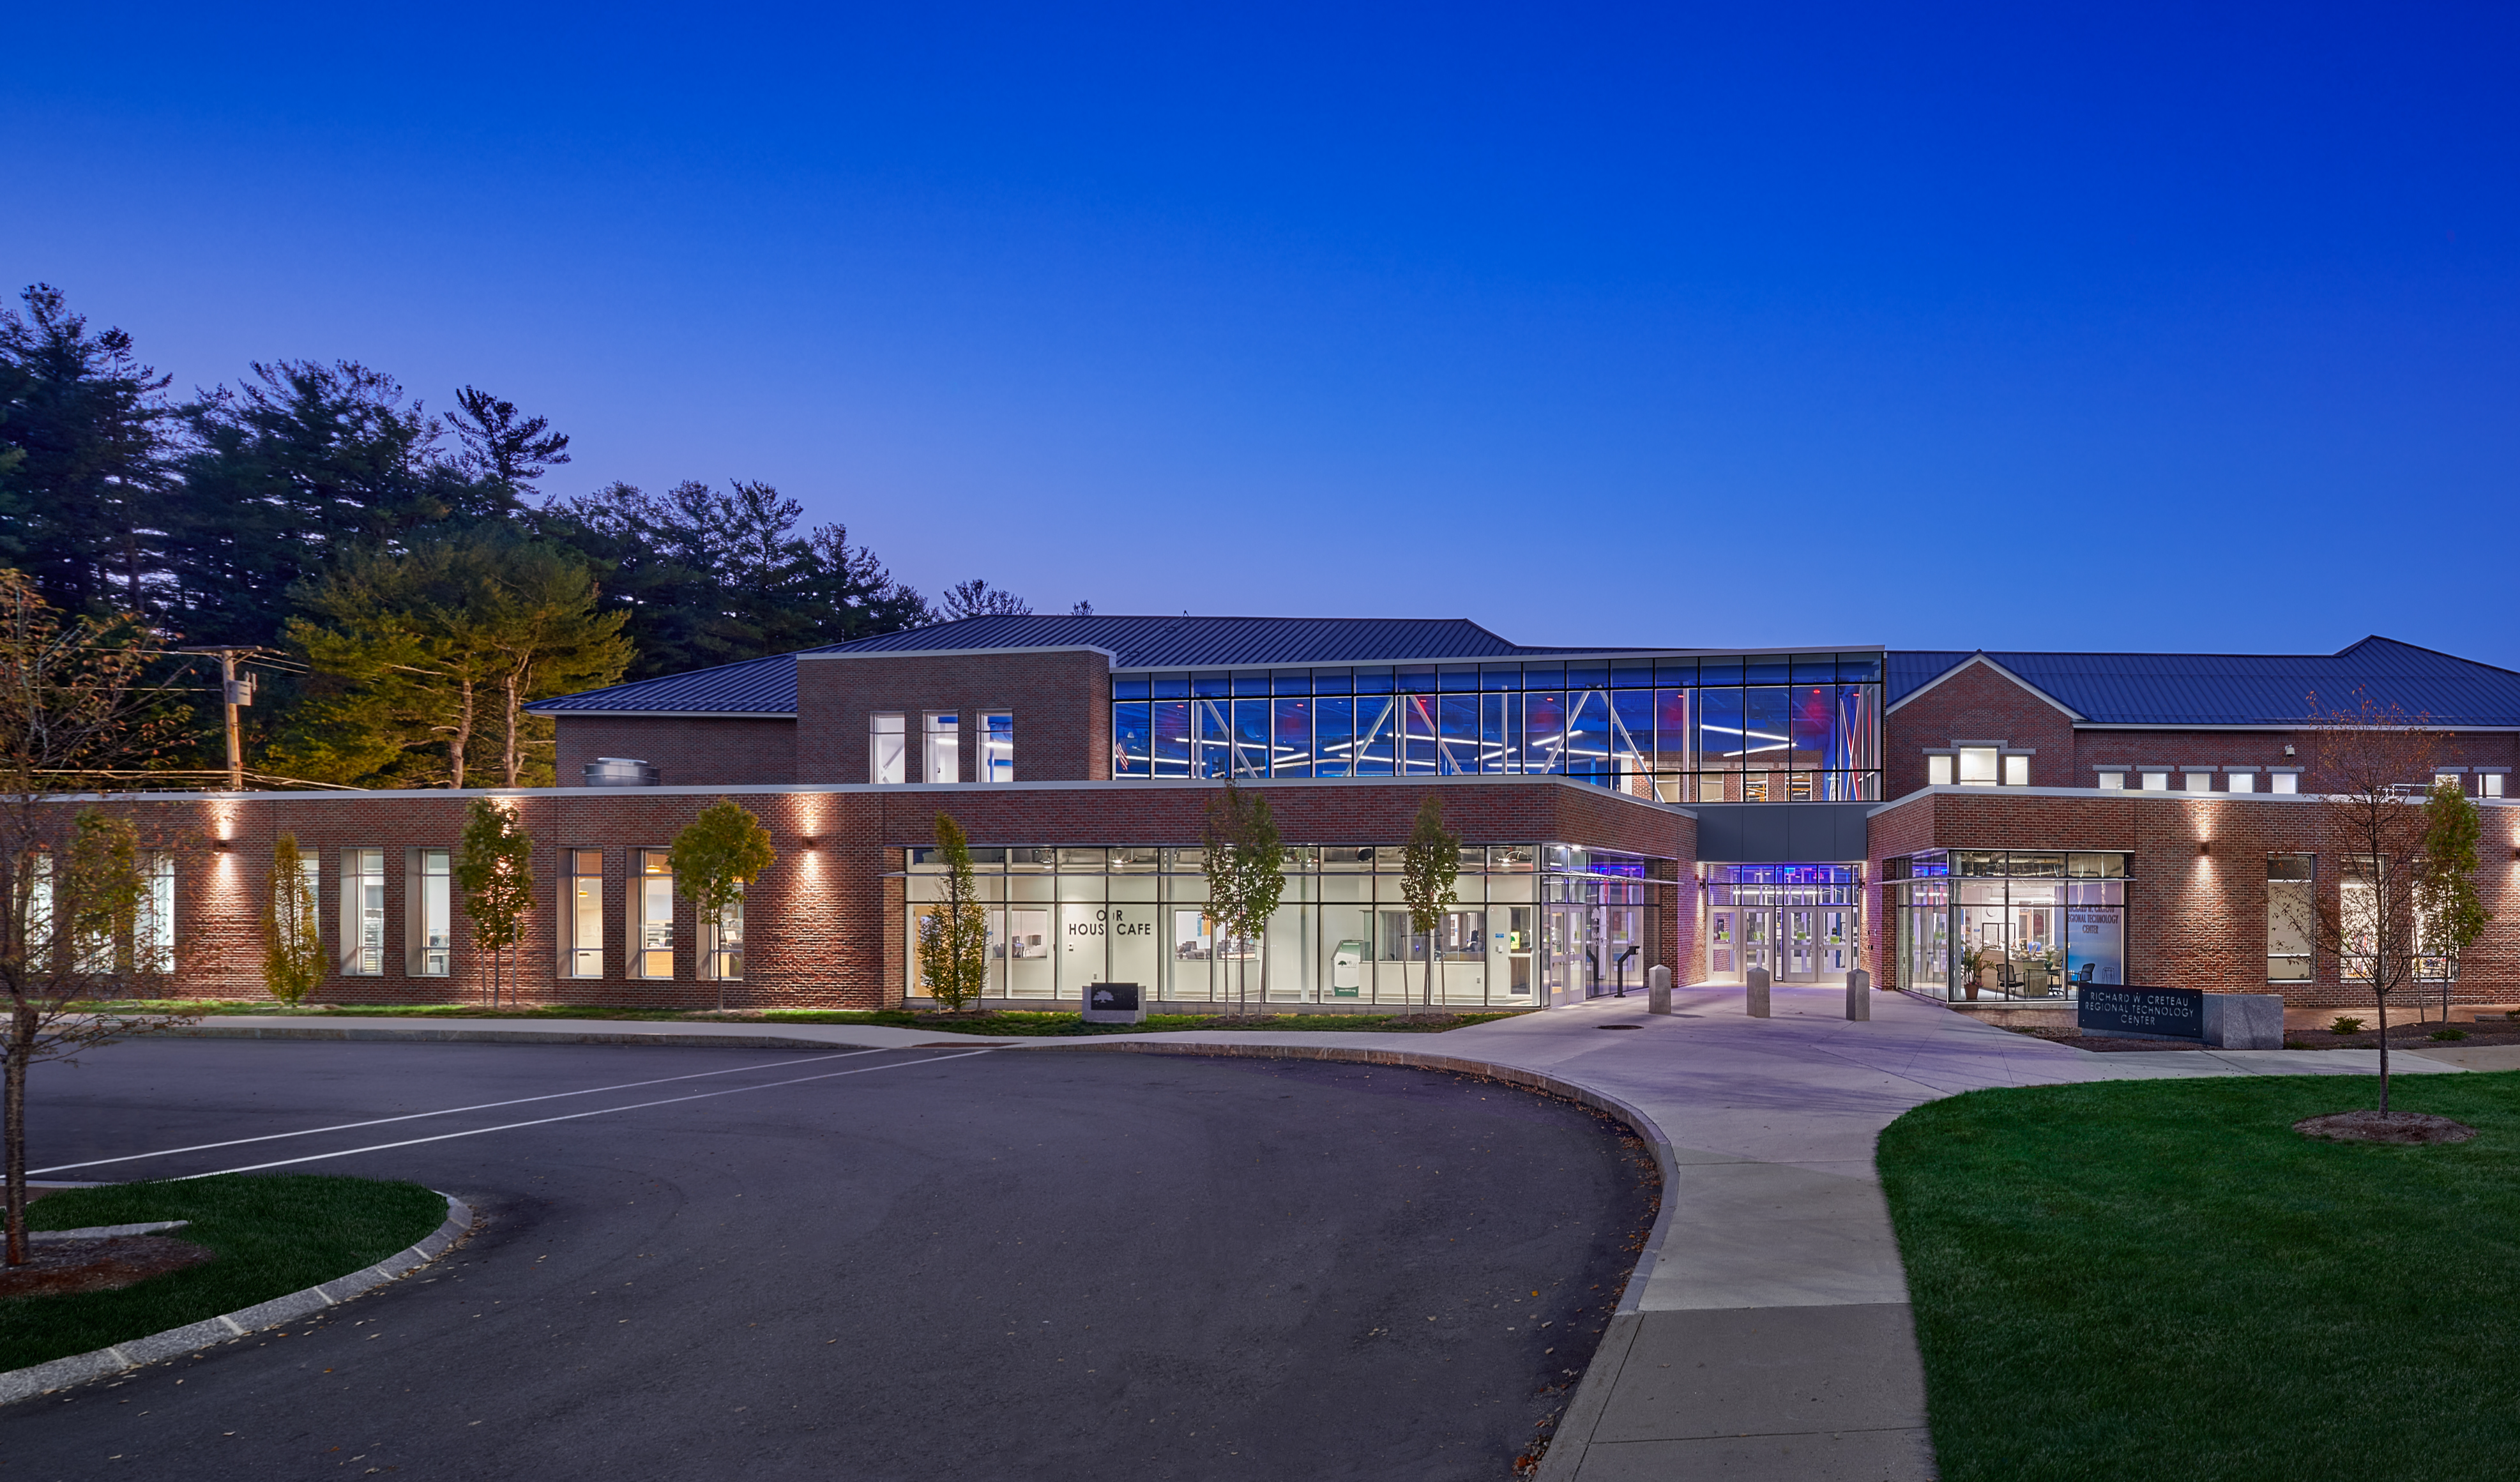 An image of the outside of the R.W. Creteau Technology center with the building all lit up!